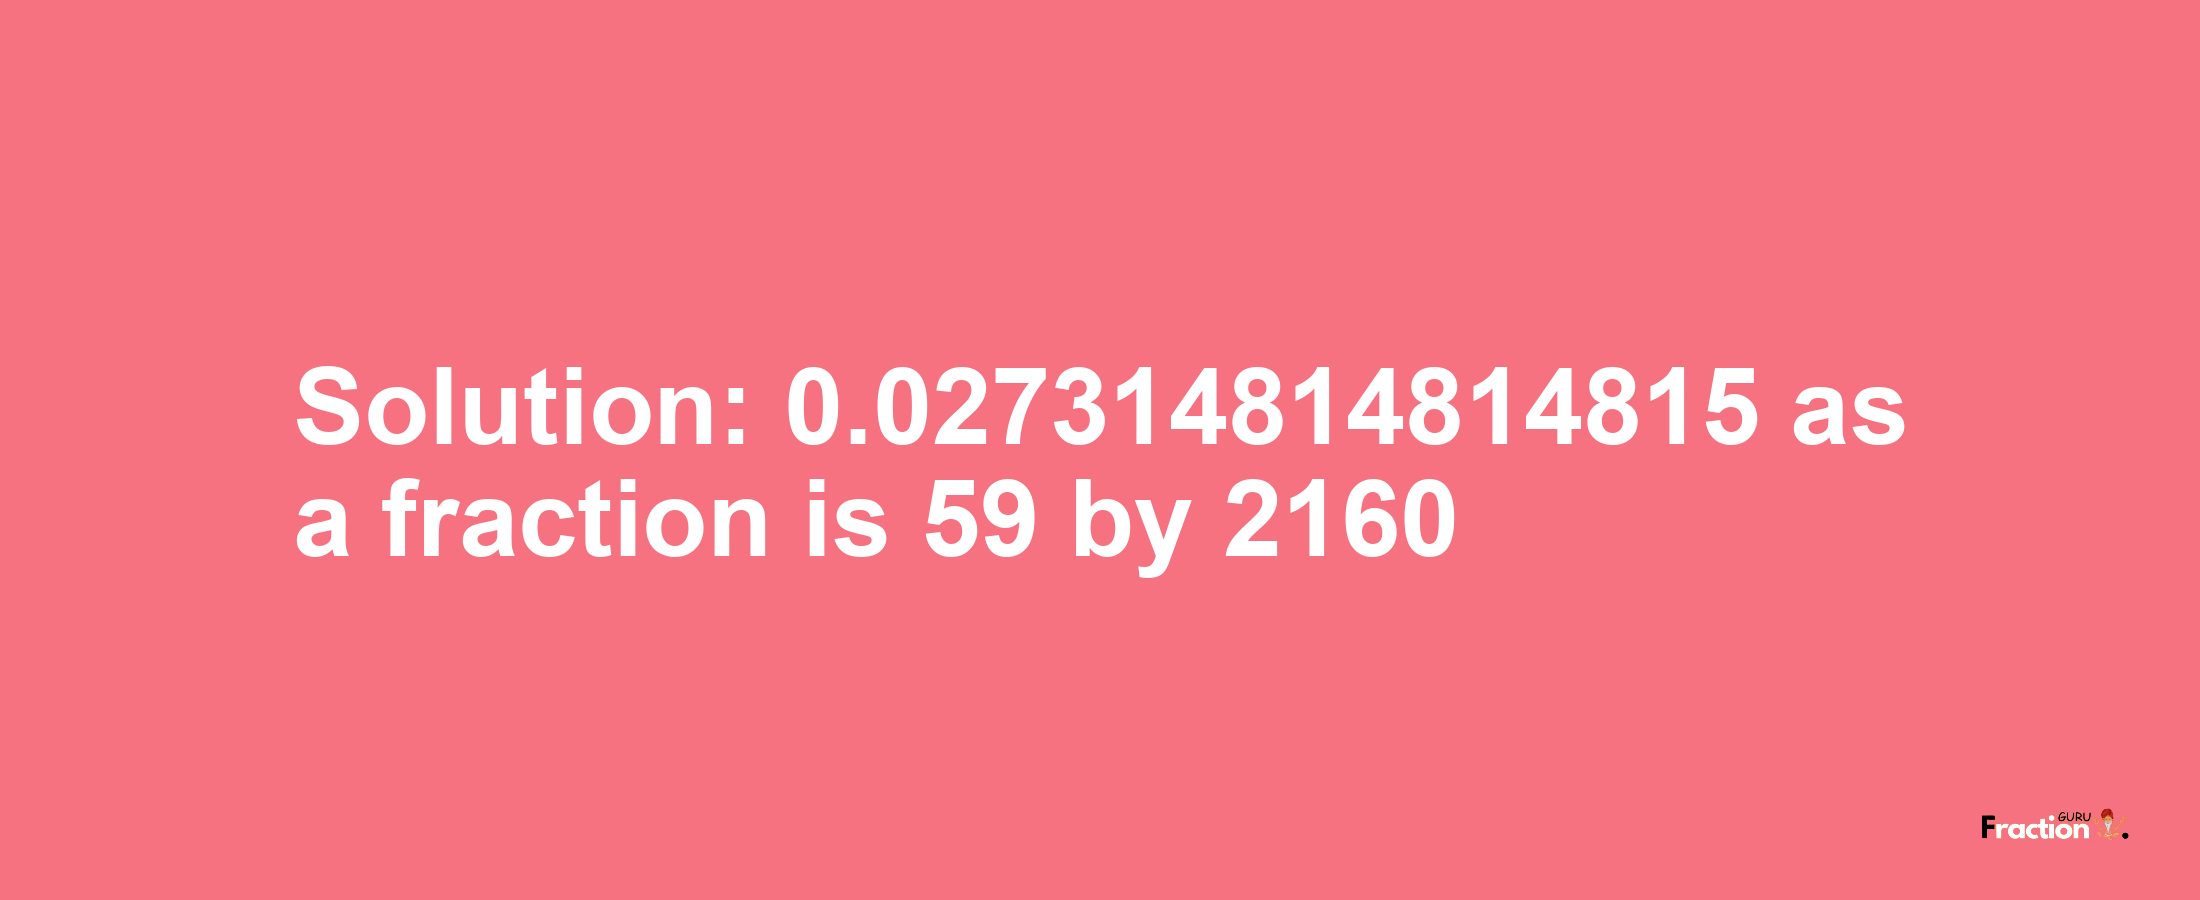 Solution:0.027314814814815 as a fraction is 59/2160